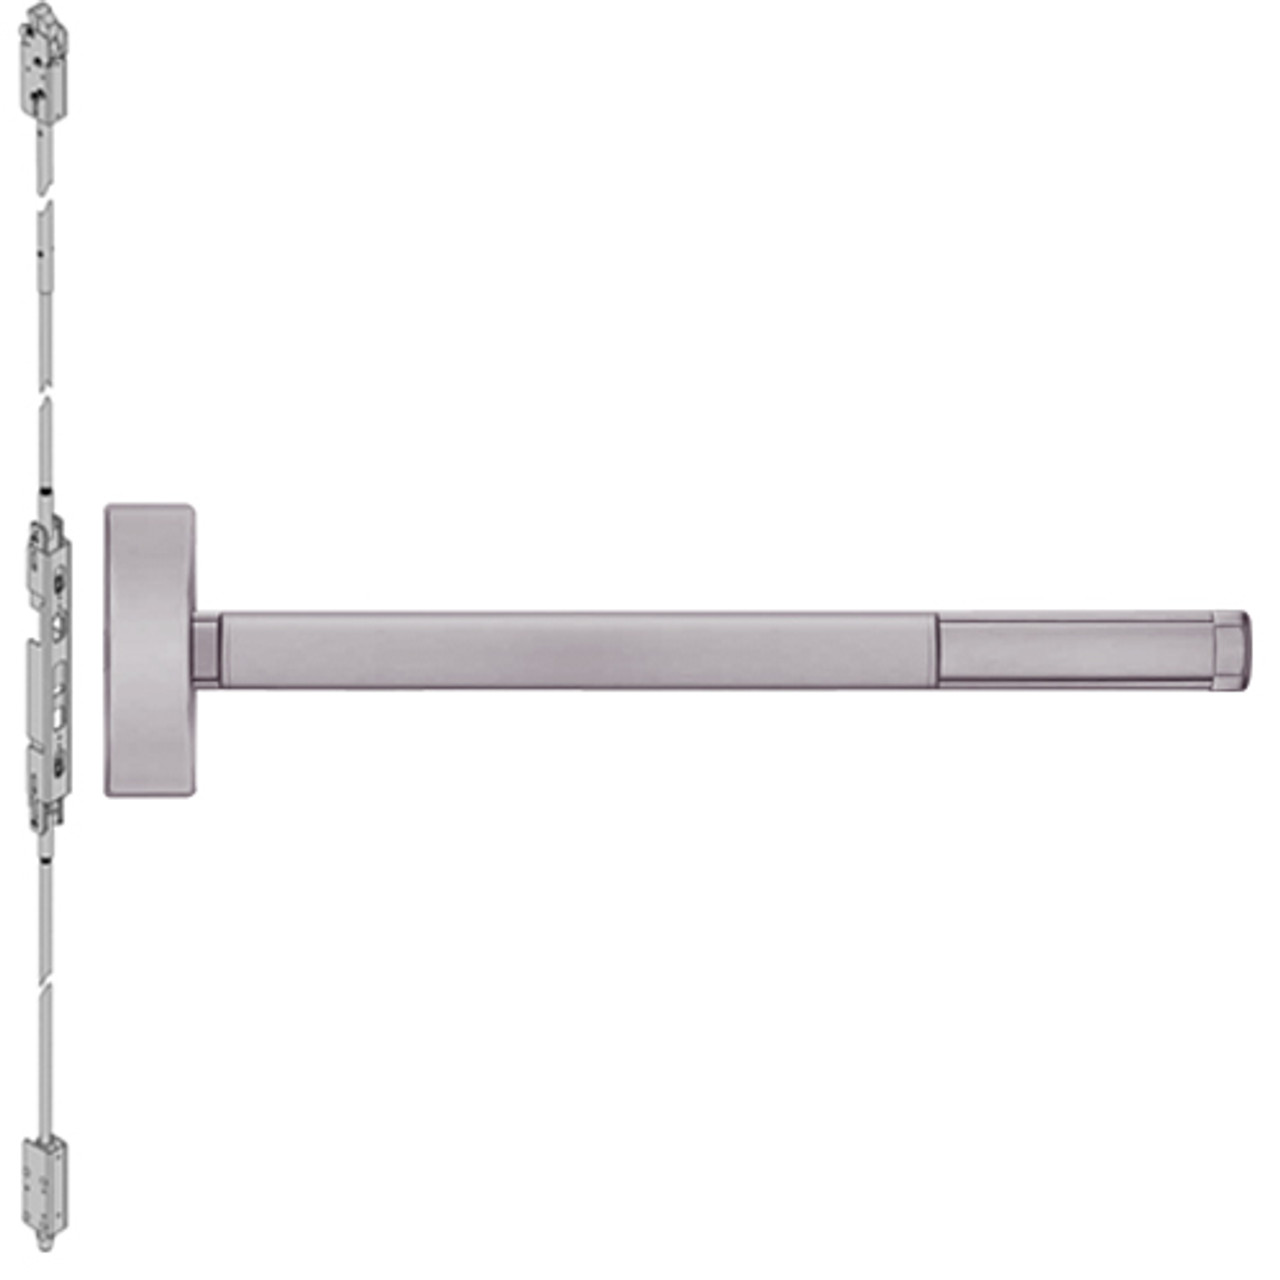 TS2801-630-36 PHI 2800 Series Concealed Vertical Rod Exit Device with Touchbar Monitoring Switch Prepped for Cover Plate in Satin Stainless Steel Finish